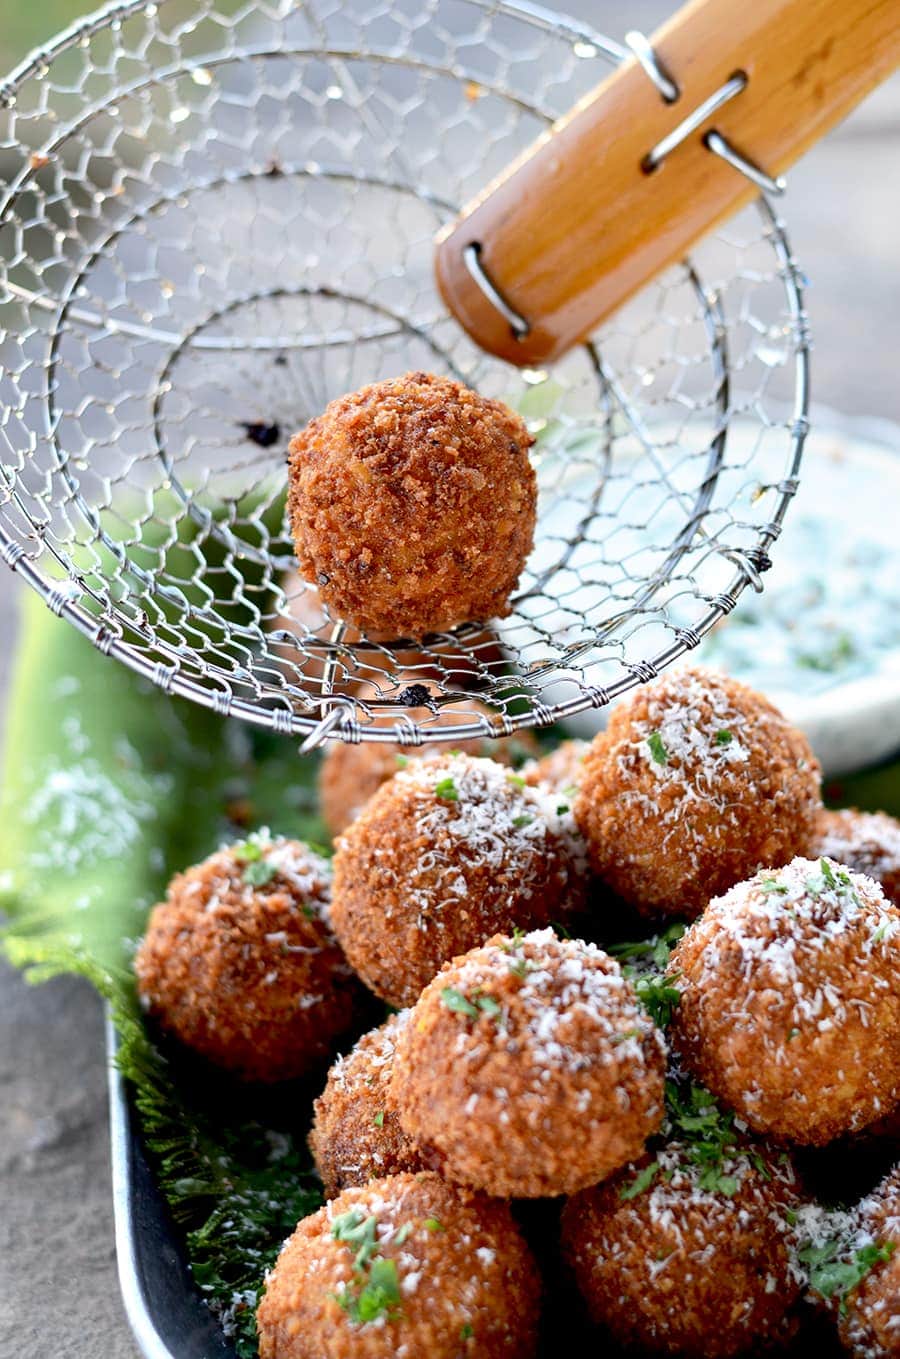 Fried Mozzarella Ball Web - Fried Mozzarella Balls with Pumpkin, Sage and Caramelized Onion